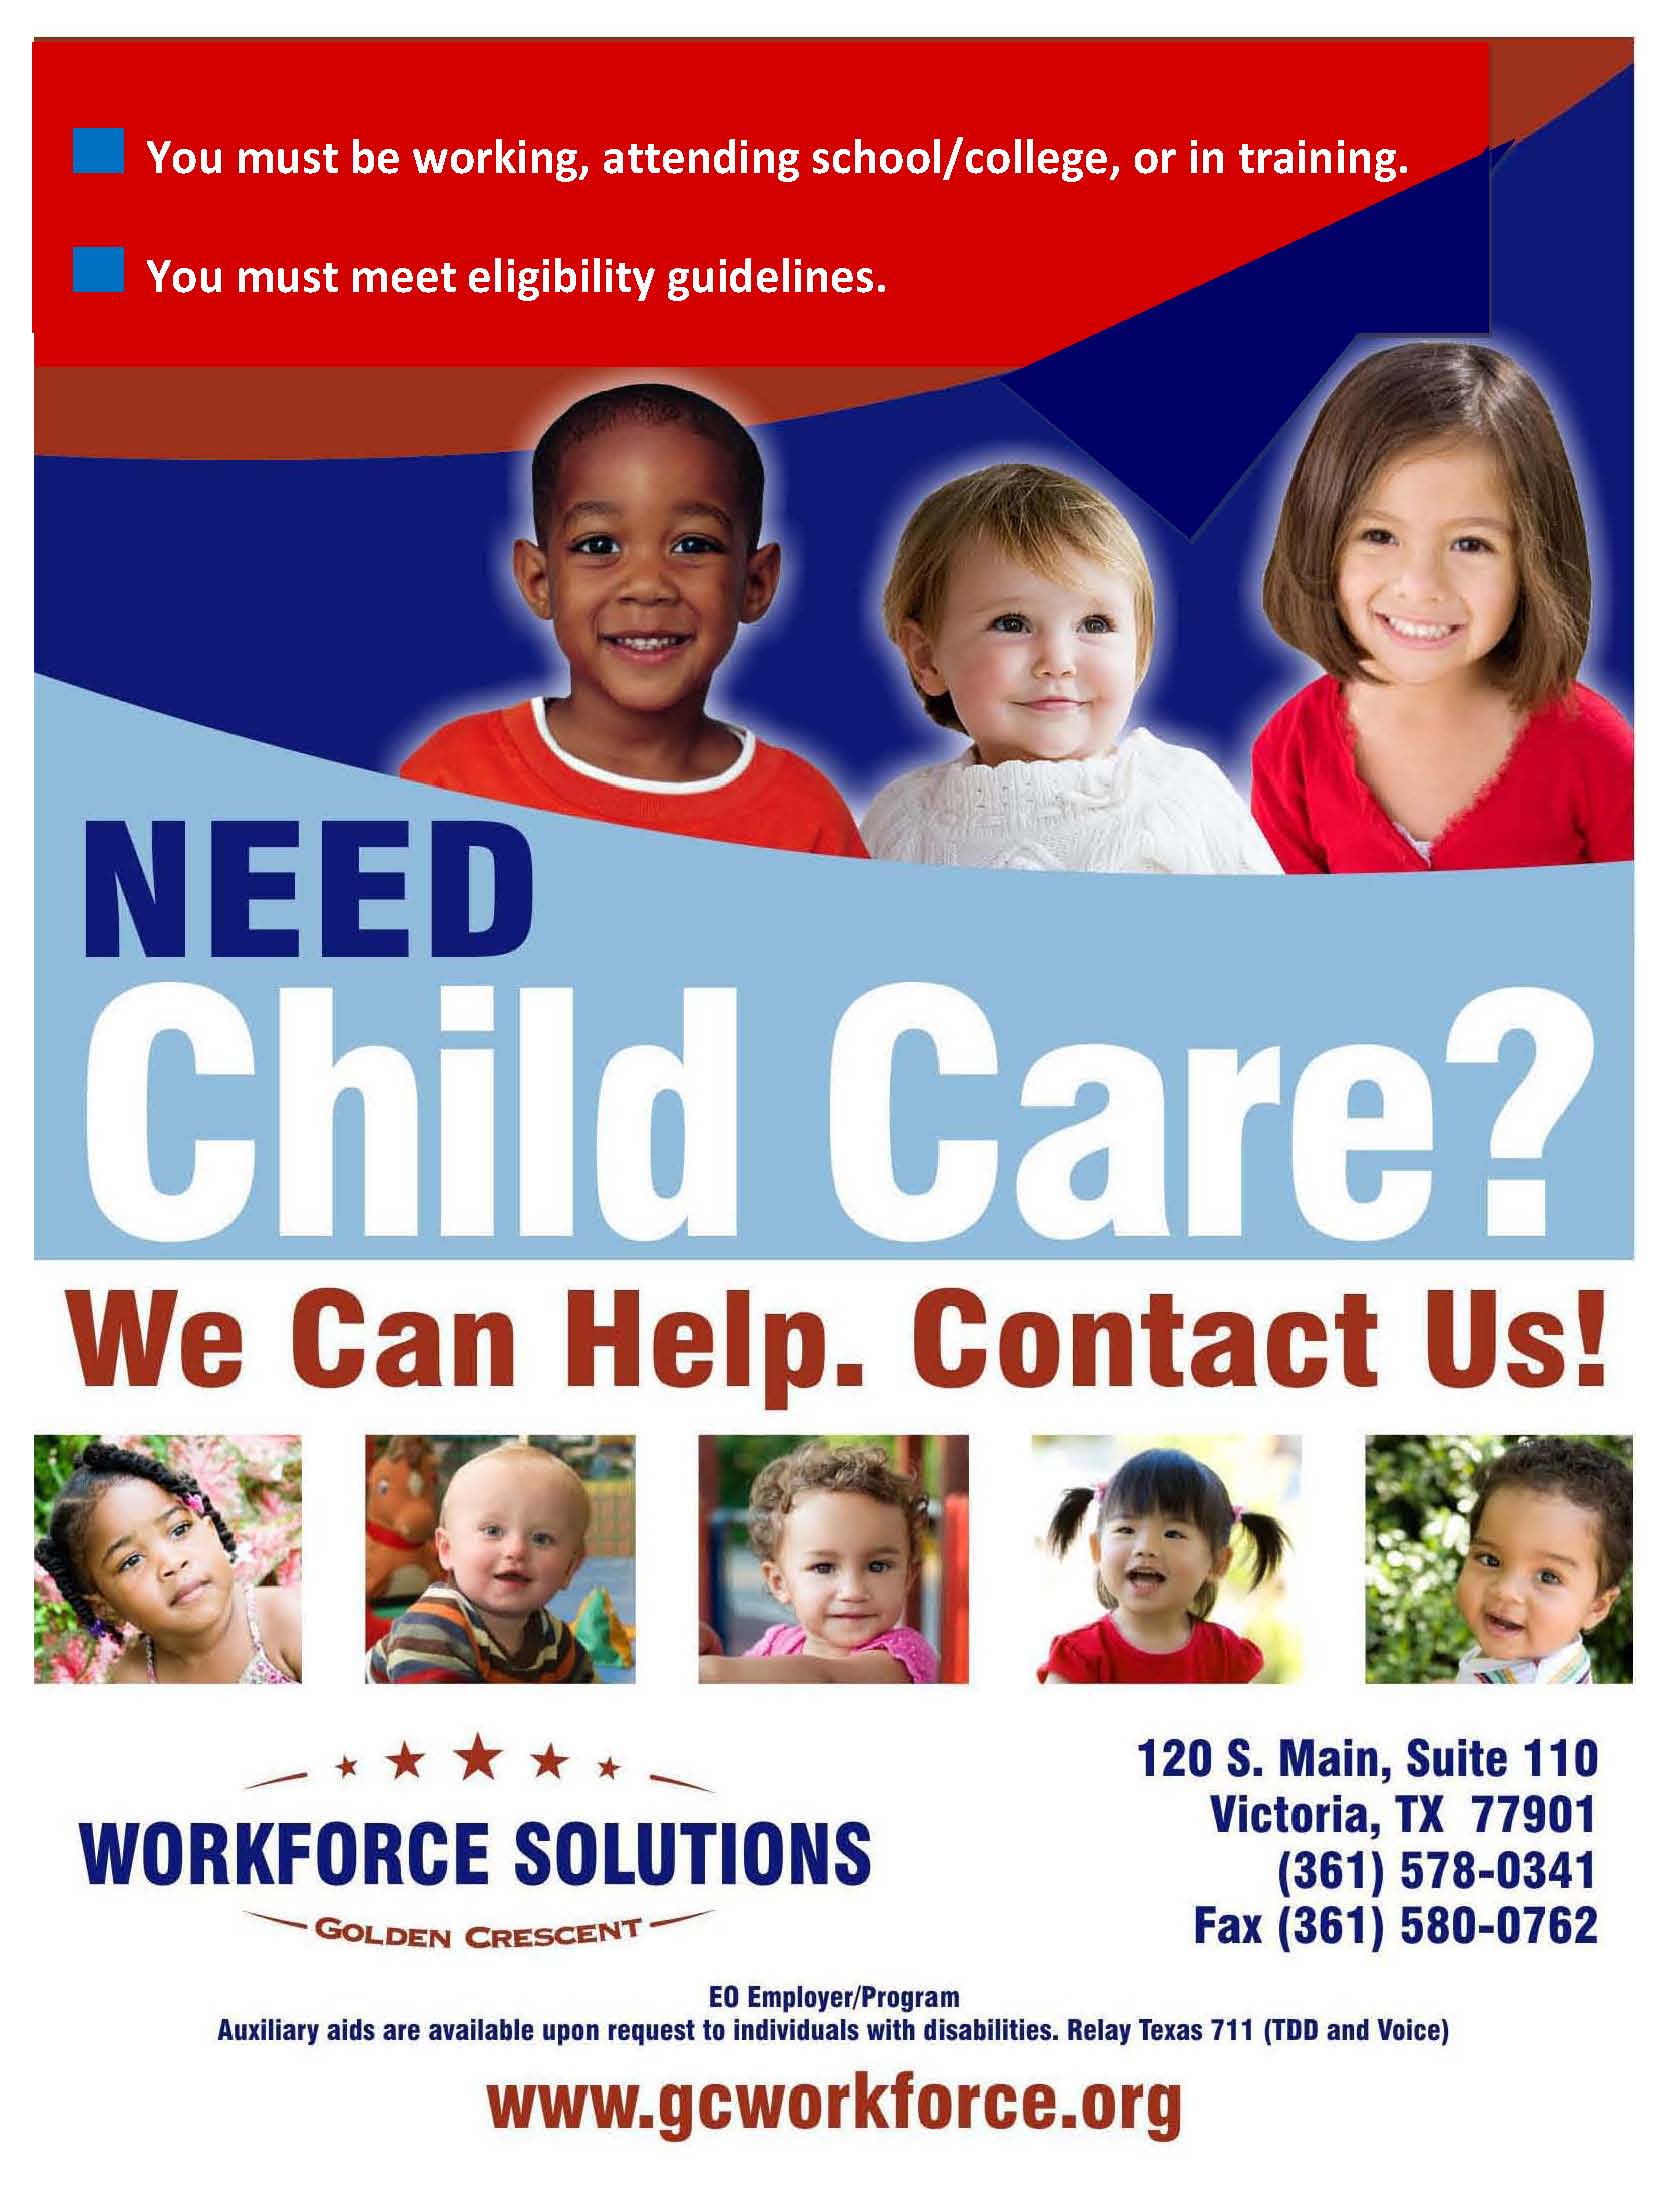 Child Care Flyer, call 361-578-0341 for help